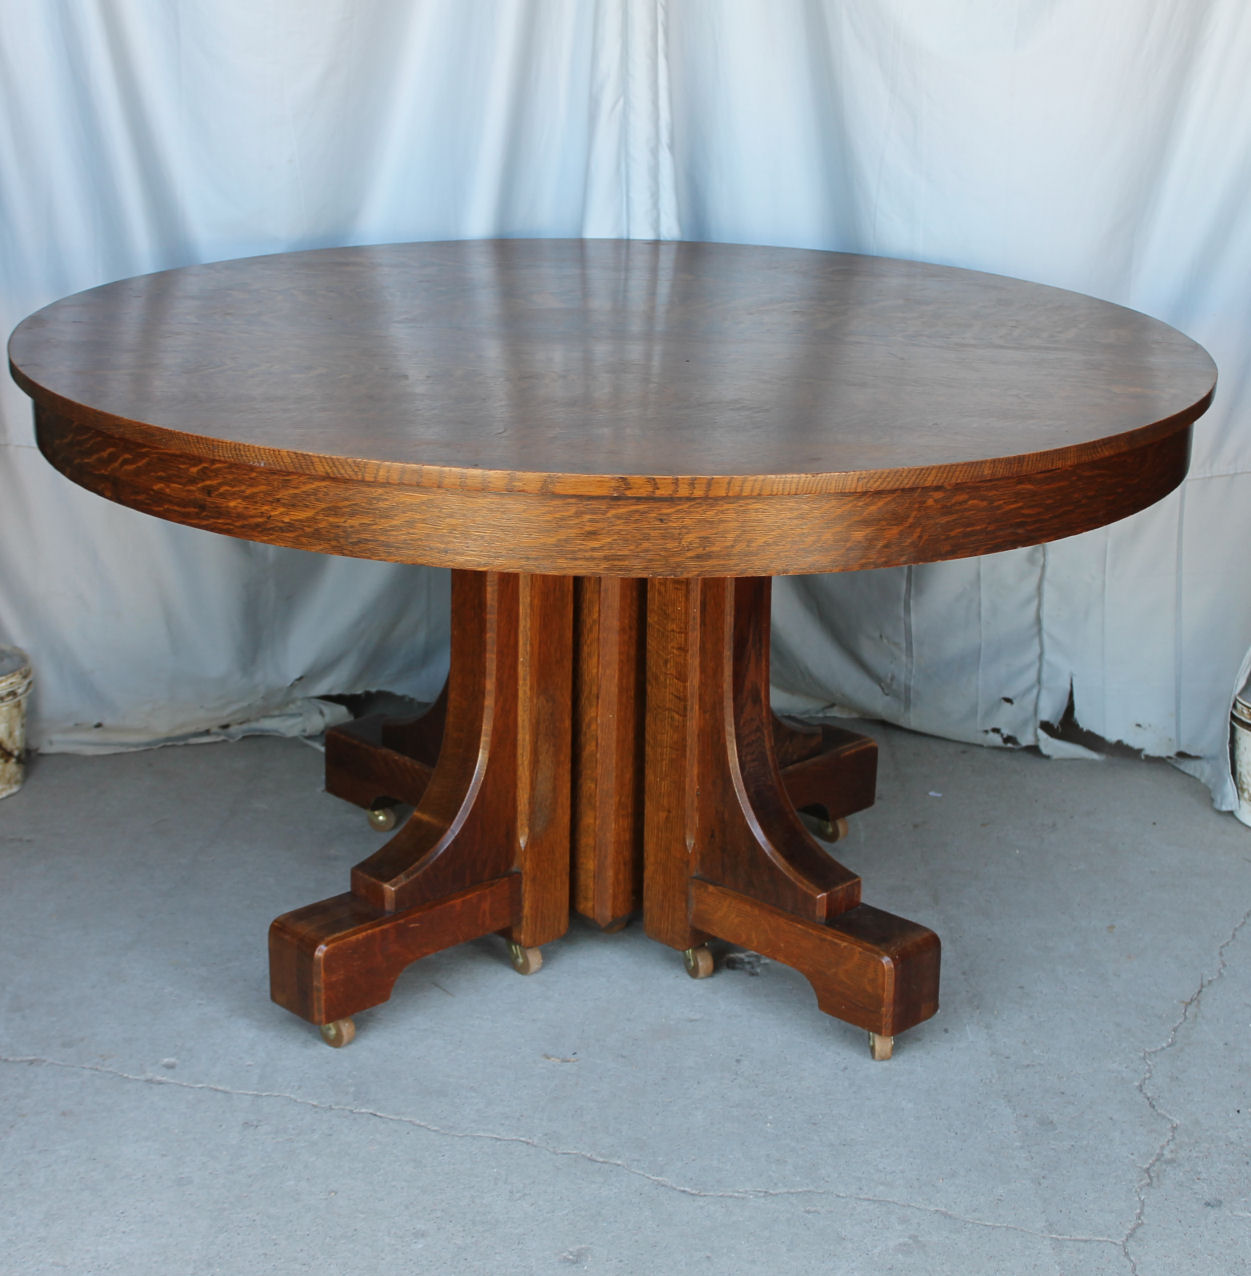 Bargain John S Antiques Mission Style Round Oak Dining Table 54 Inch 4 Leaves Bargain John S Antiques